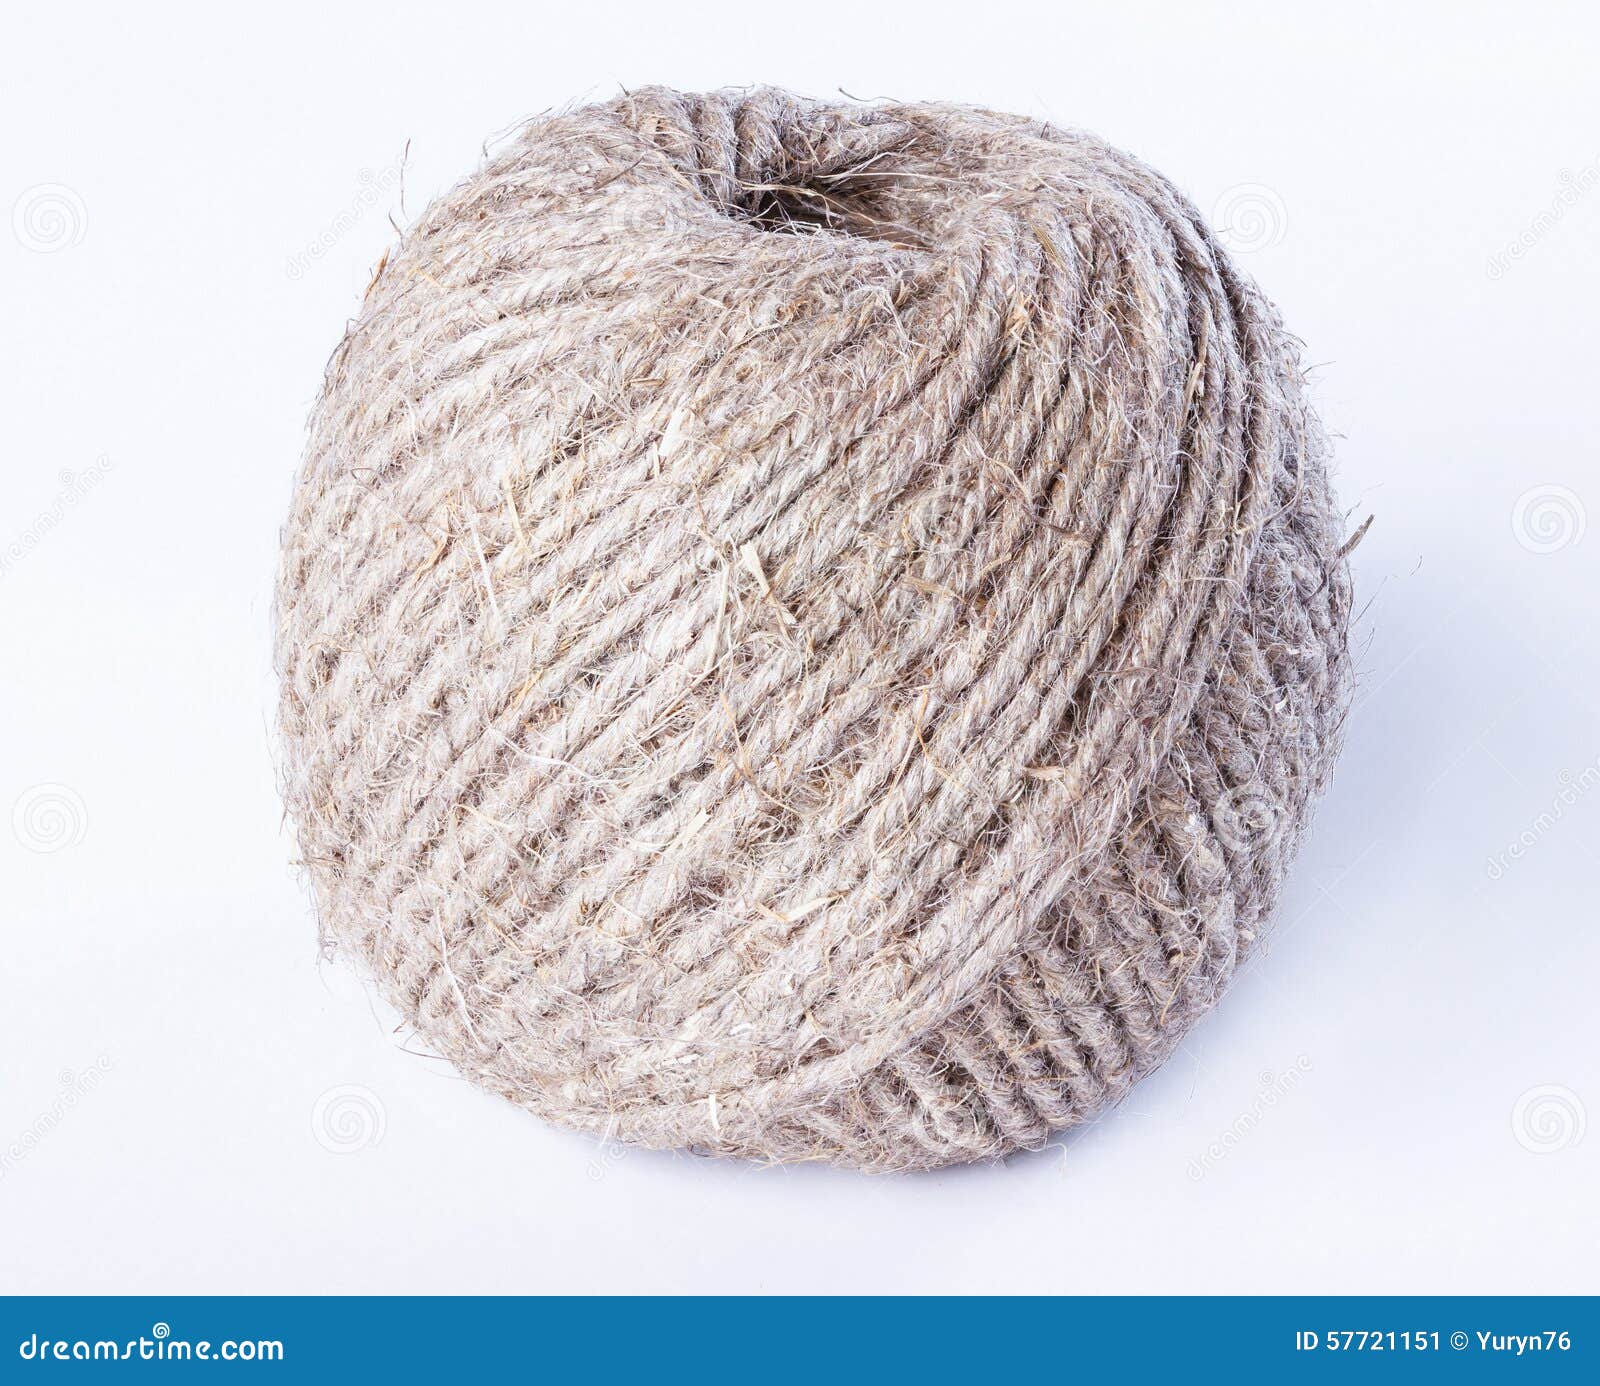 Skein of twine stock image. Image of textured, cord, packthread